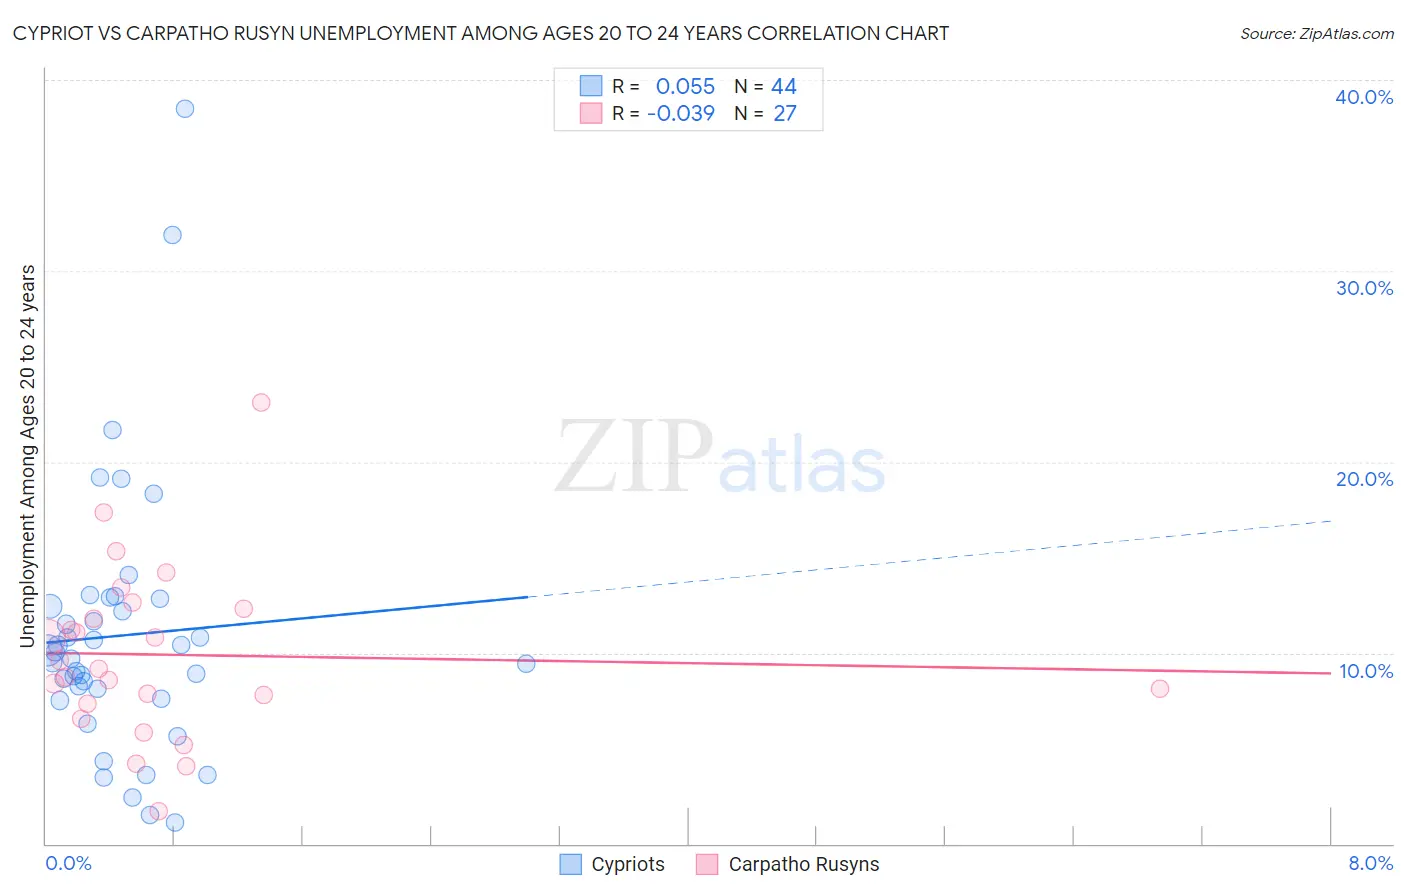 Cypriot vs Carpatho Rusyn Unemployment Among Ages 20 to 24 years